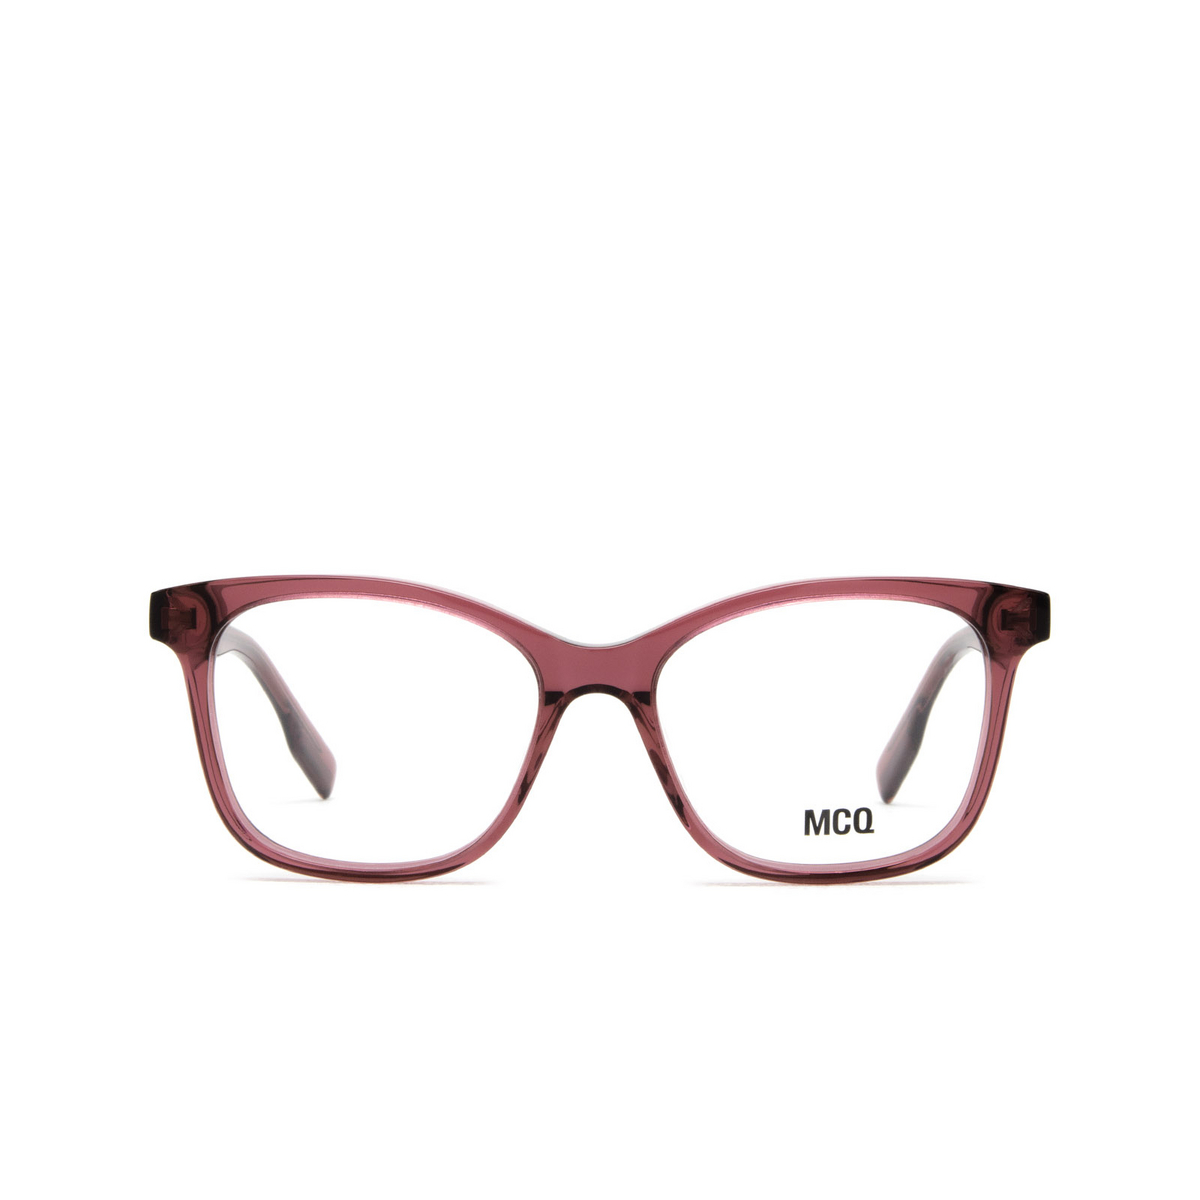 Alexander McQueen® Square Eyeglasses: MQ0304O color 004 Burgundy - front view